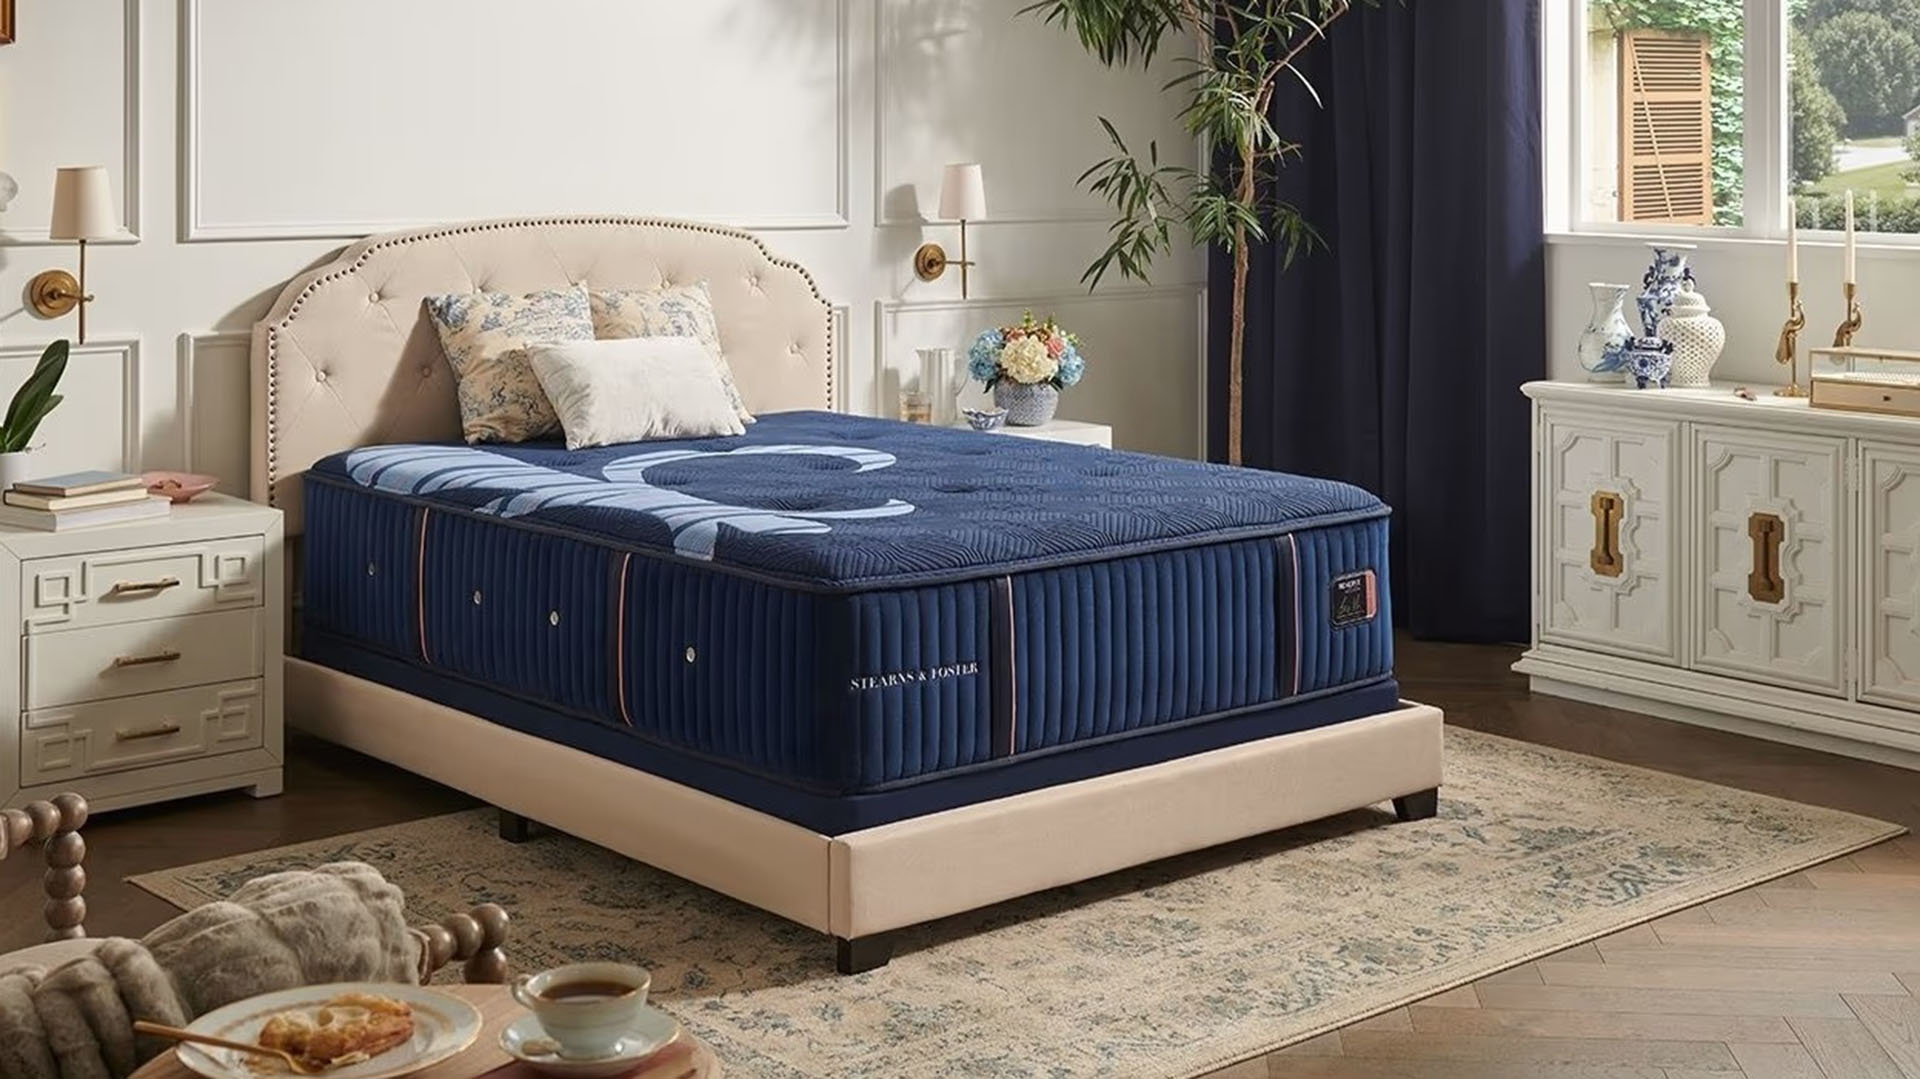 Stearns & Foster mattresses in Murrieta are designed with comfort and support in mind.